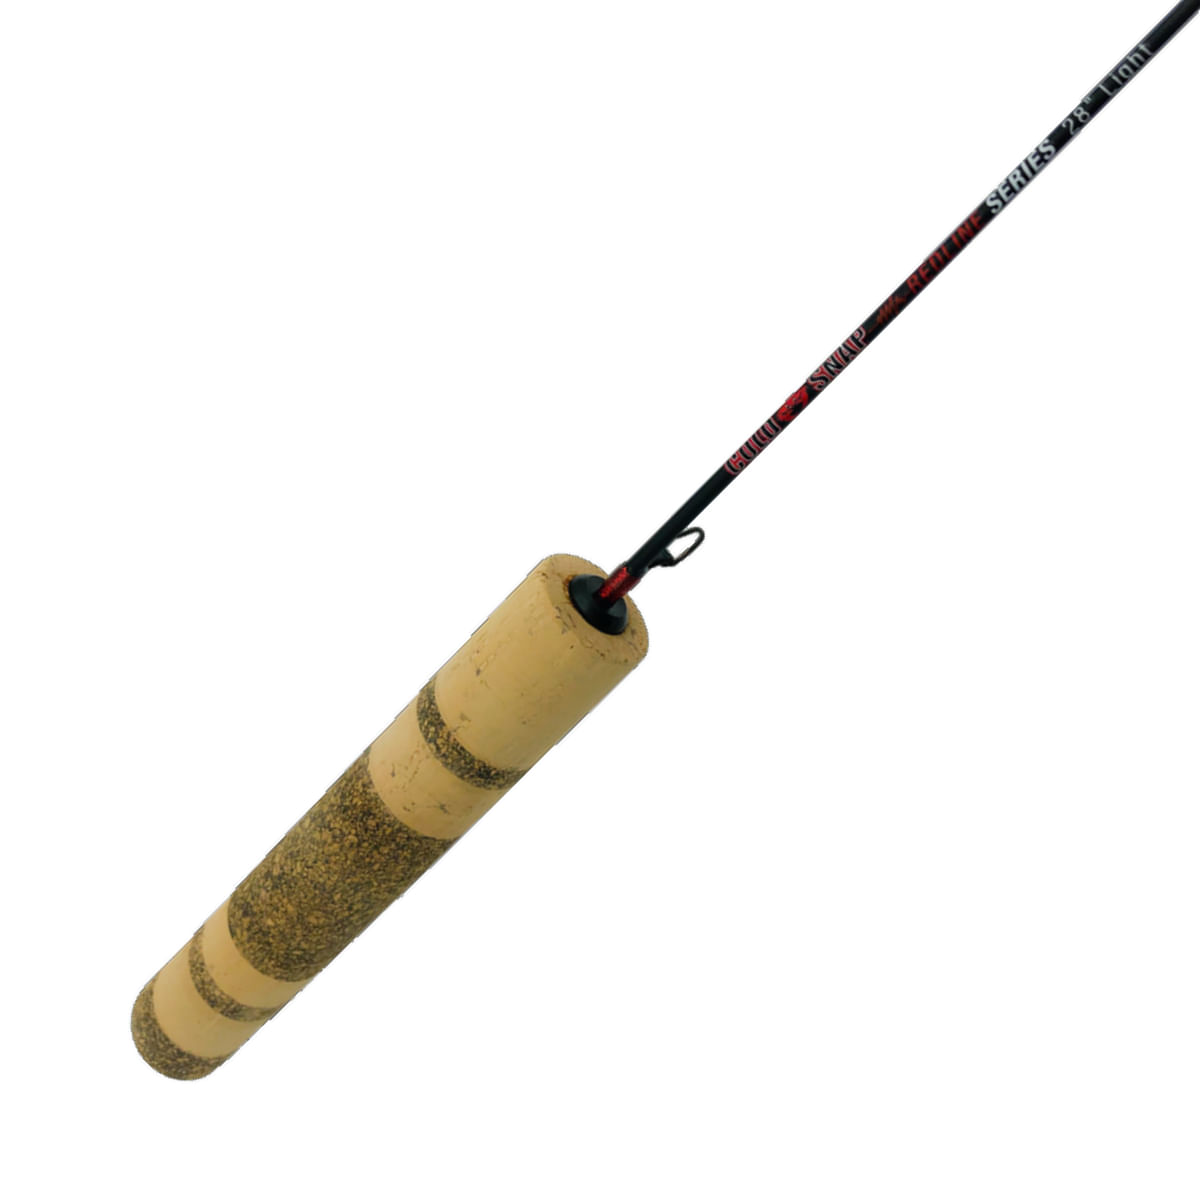 Cold Snap Red Line Ice Fishing Rod - Als.com